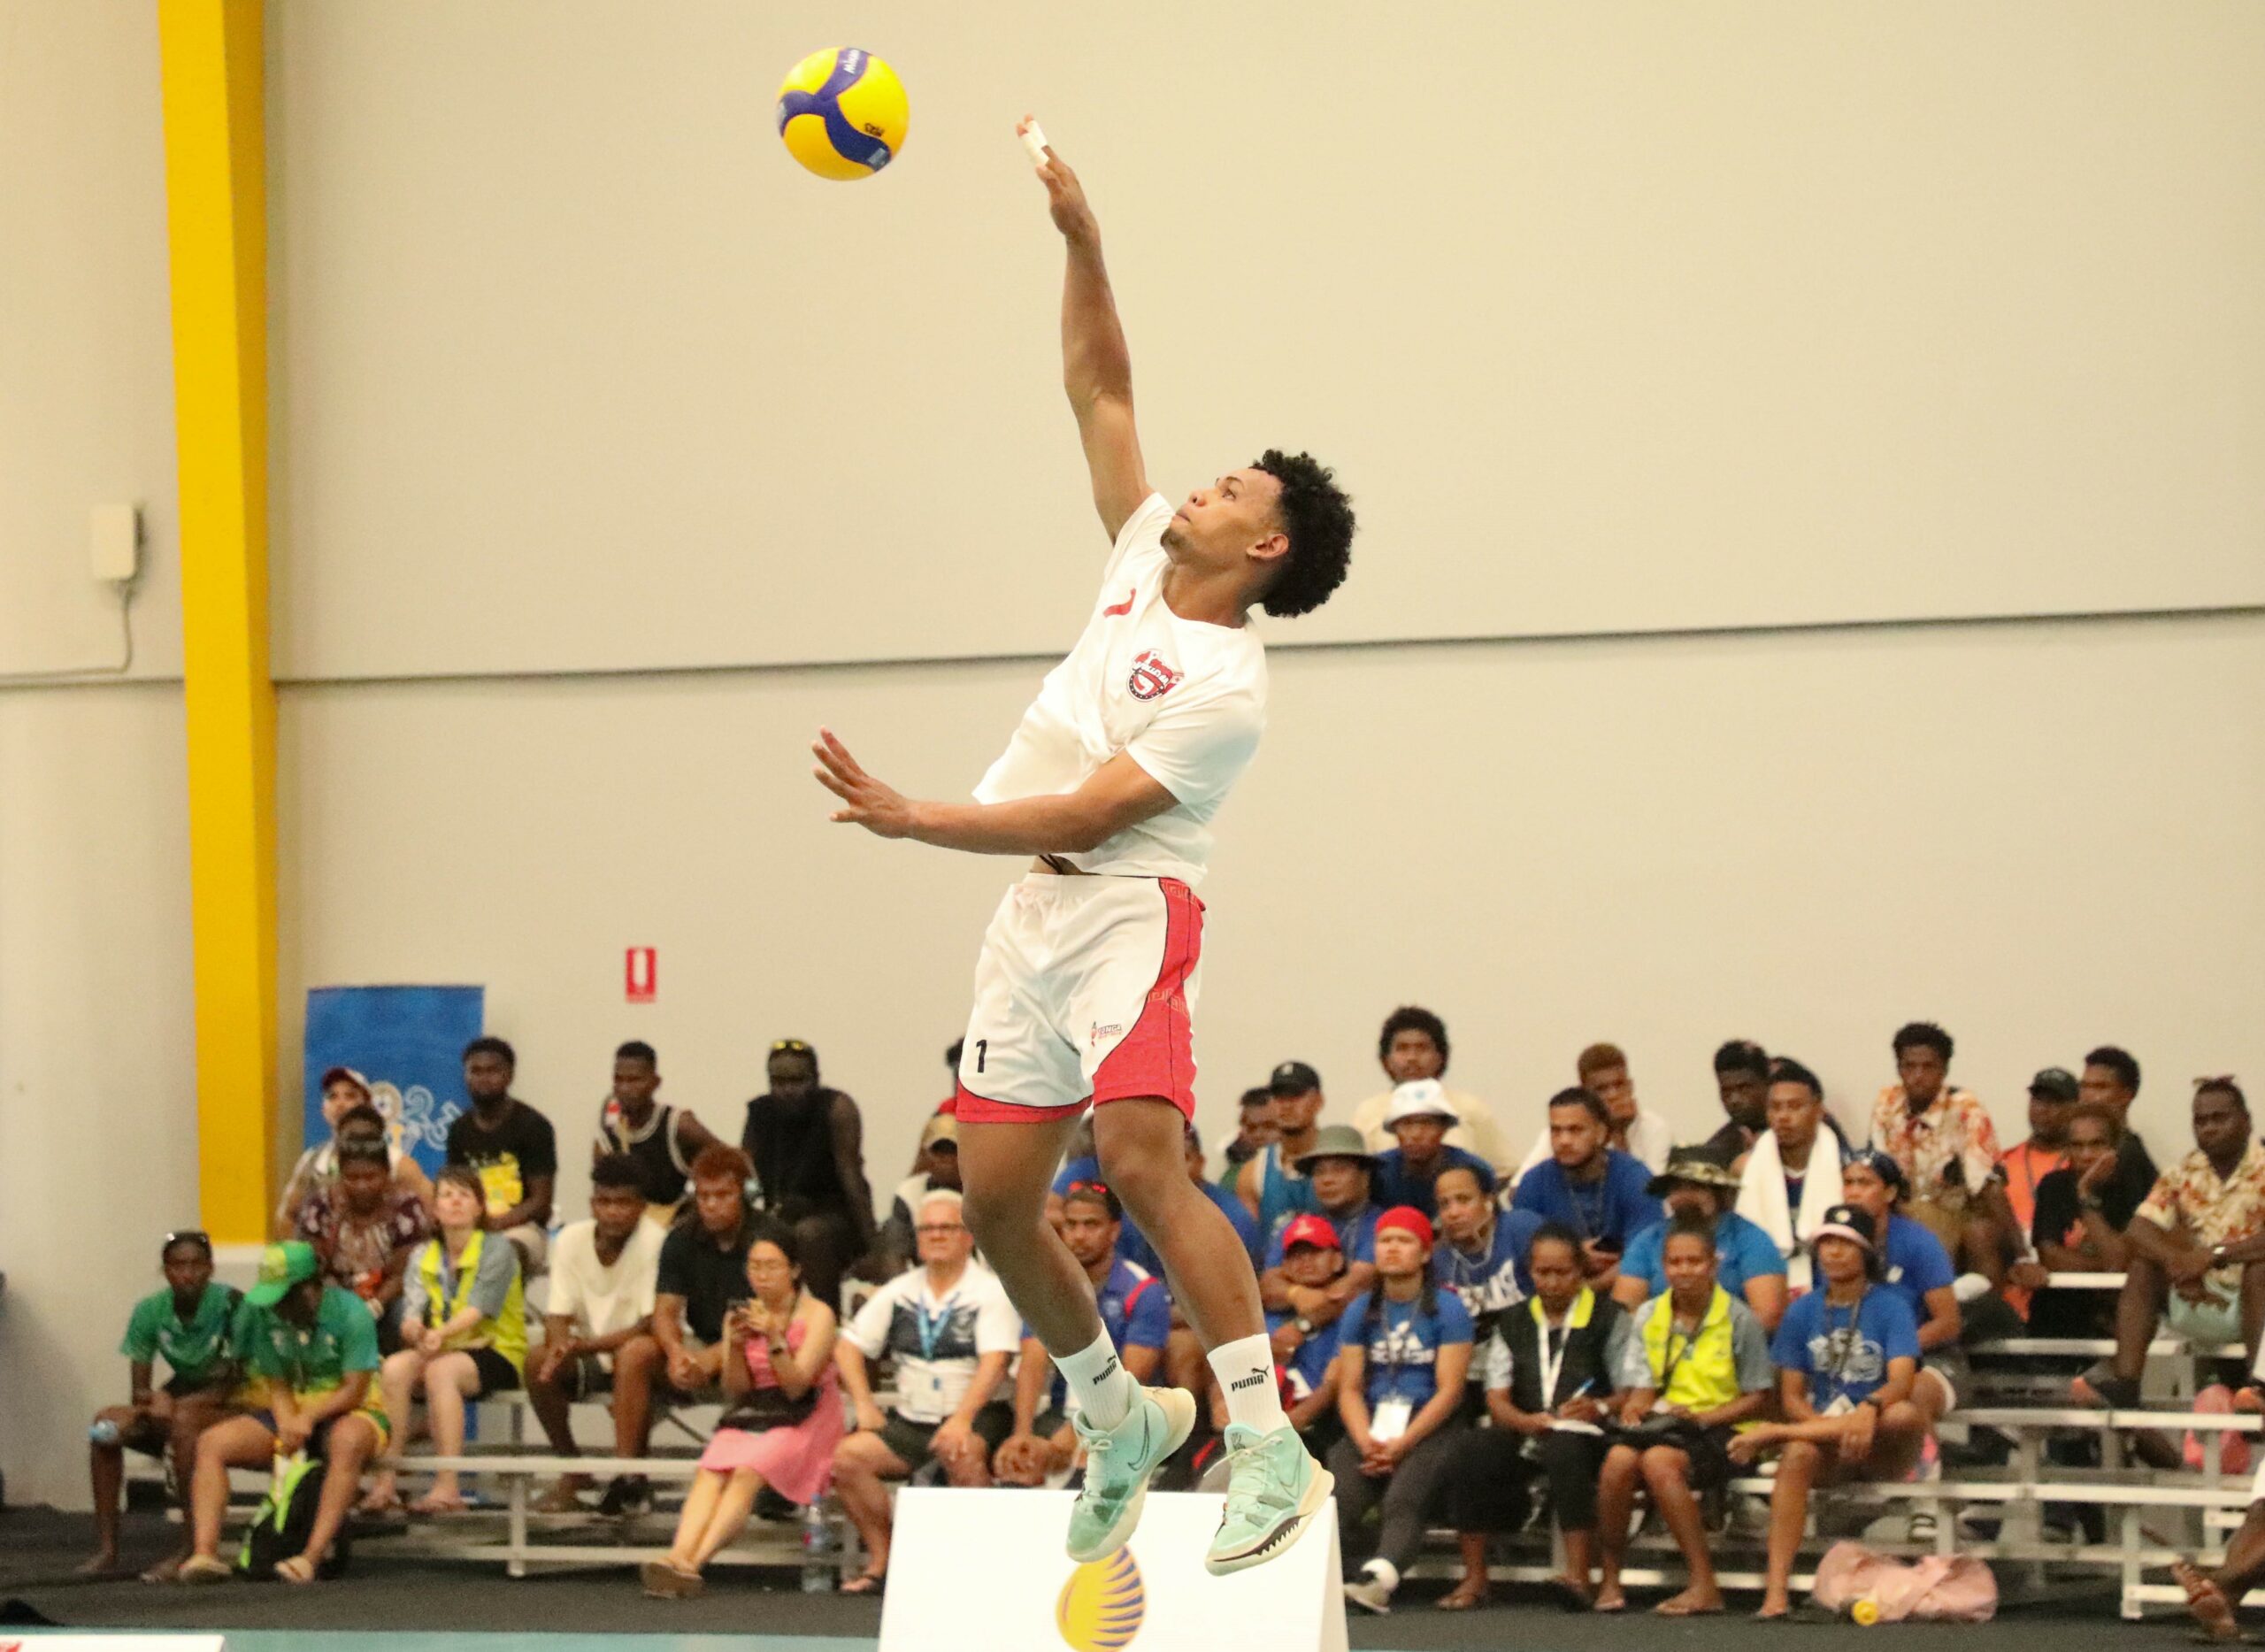 A man playing volleyball